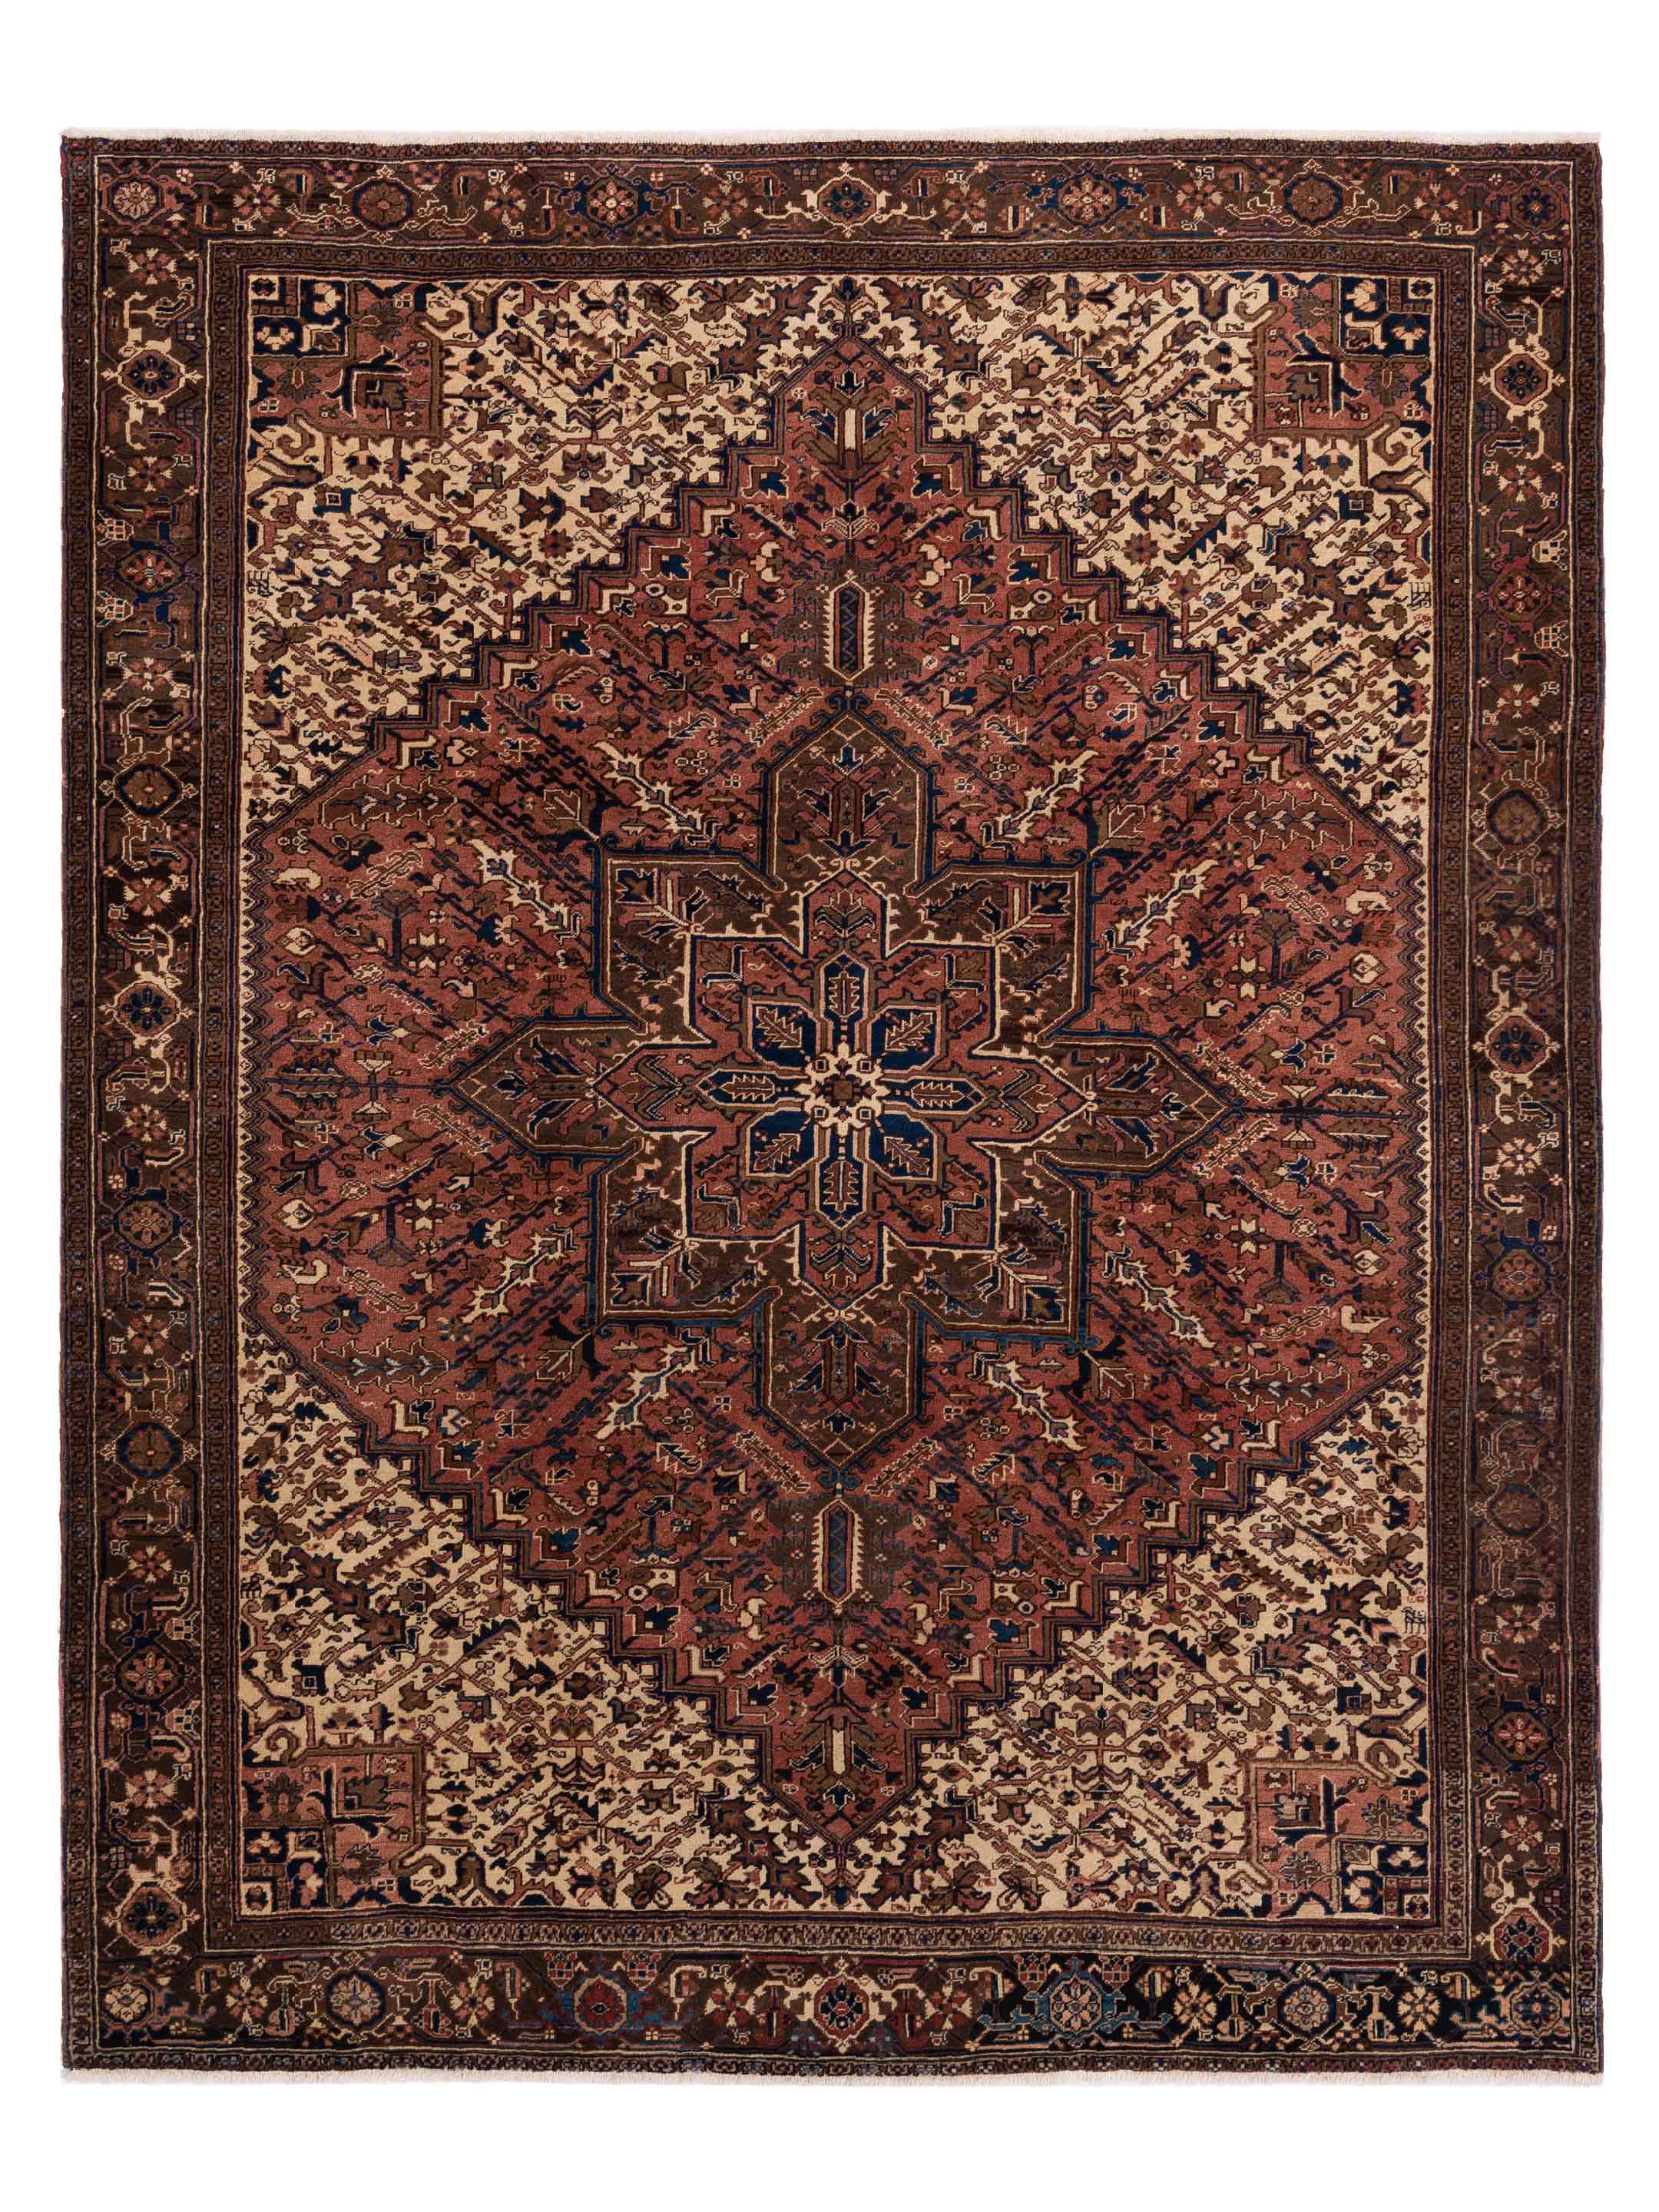 Antique Heirloom Traditional Brick Brown 10x13 Area Rug	